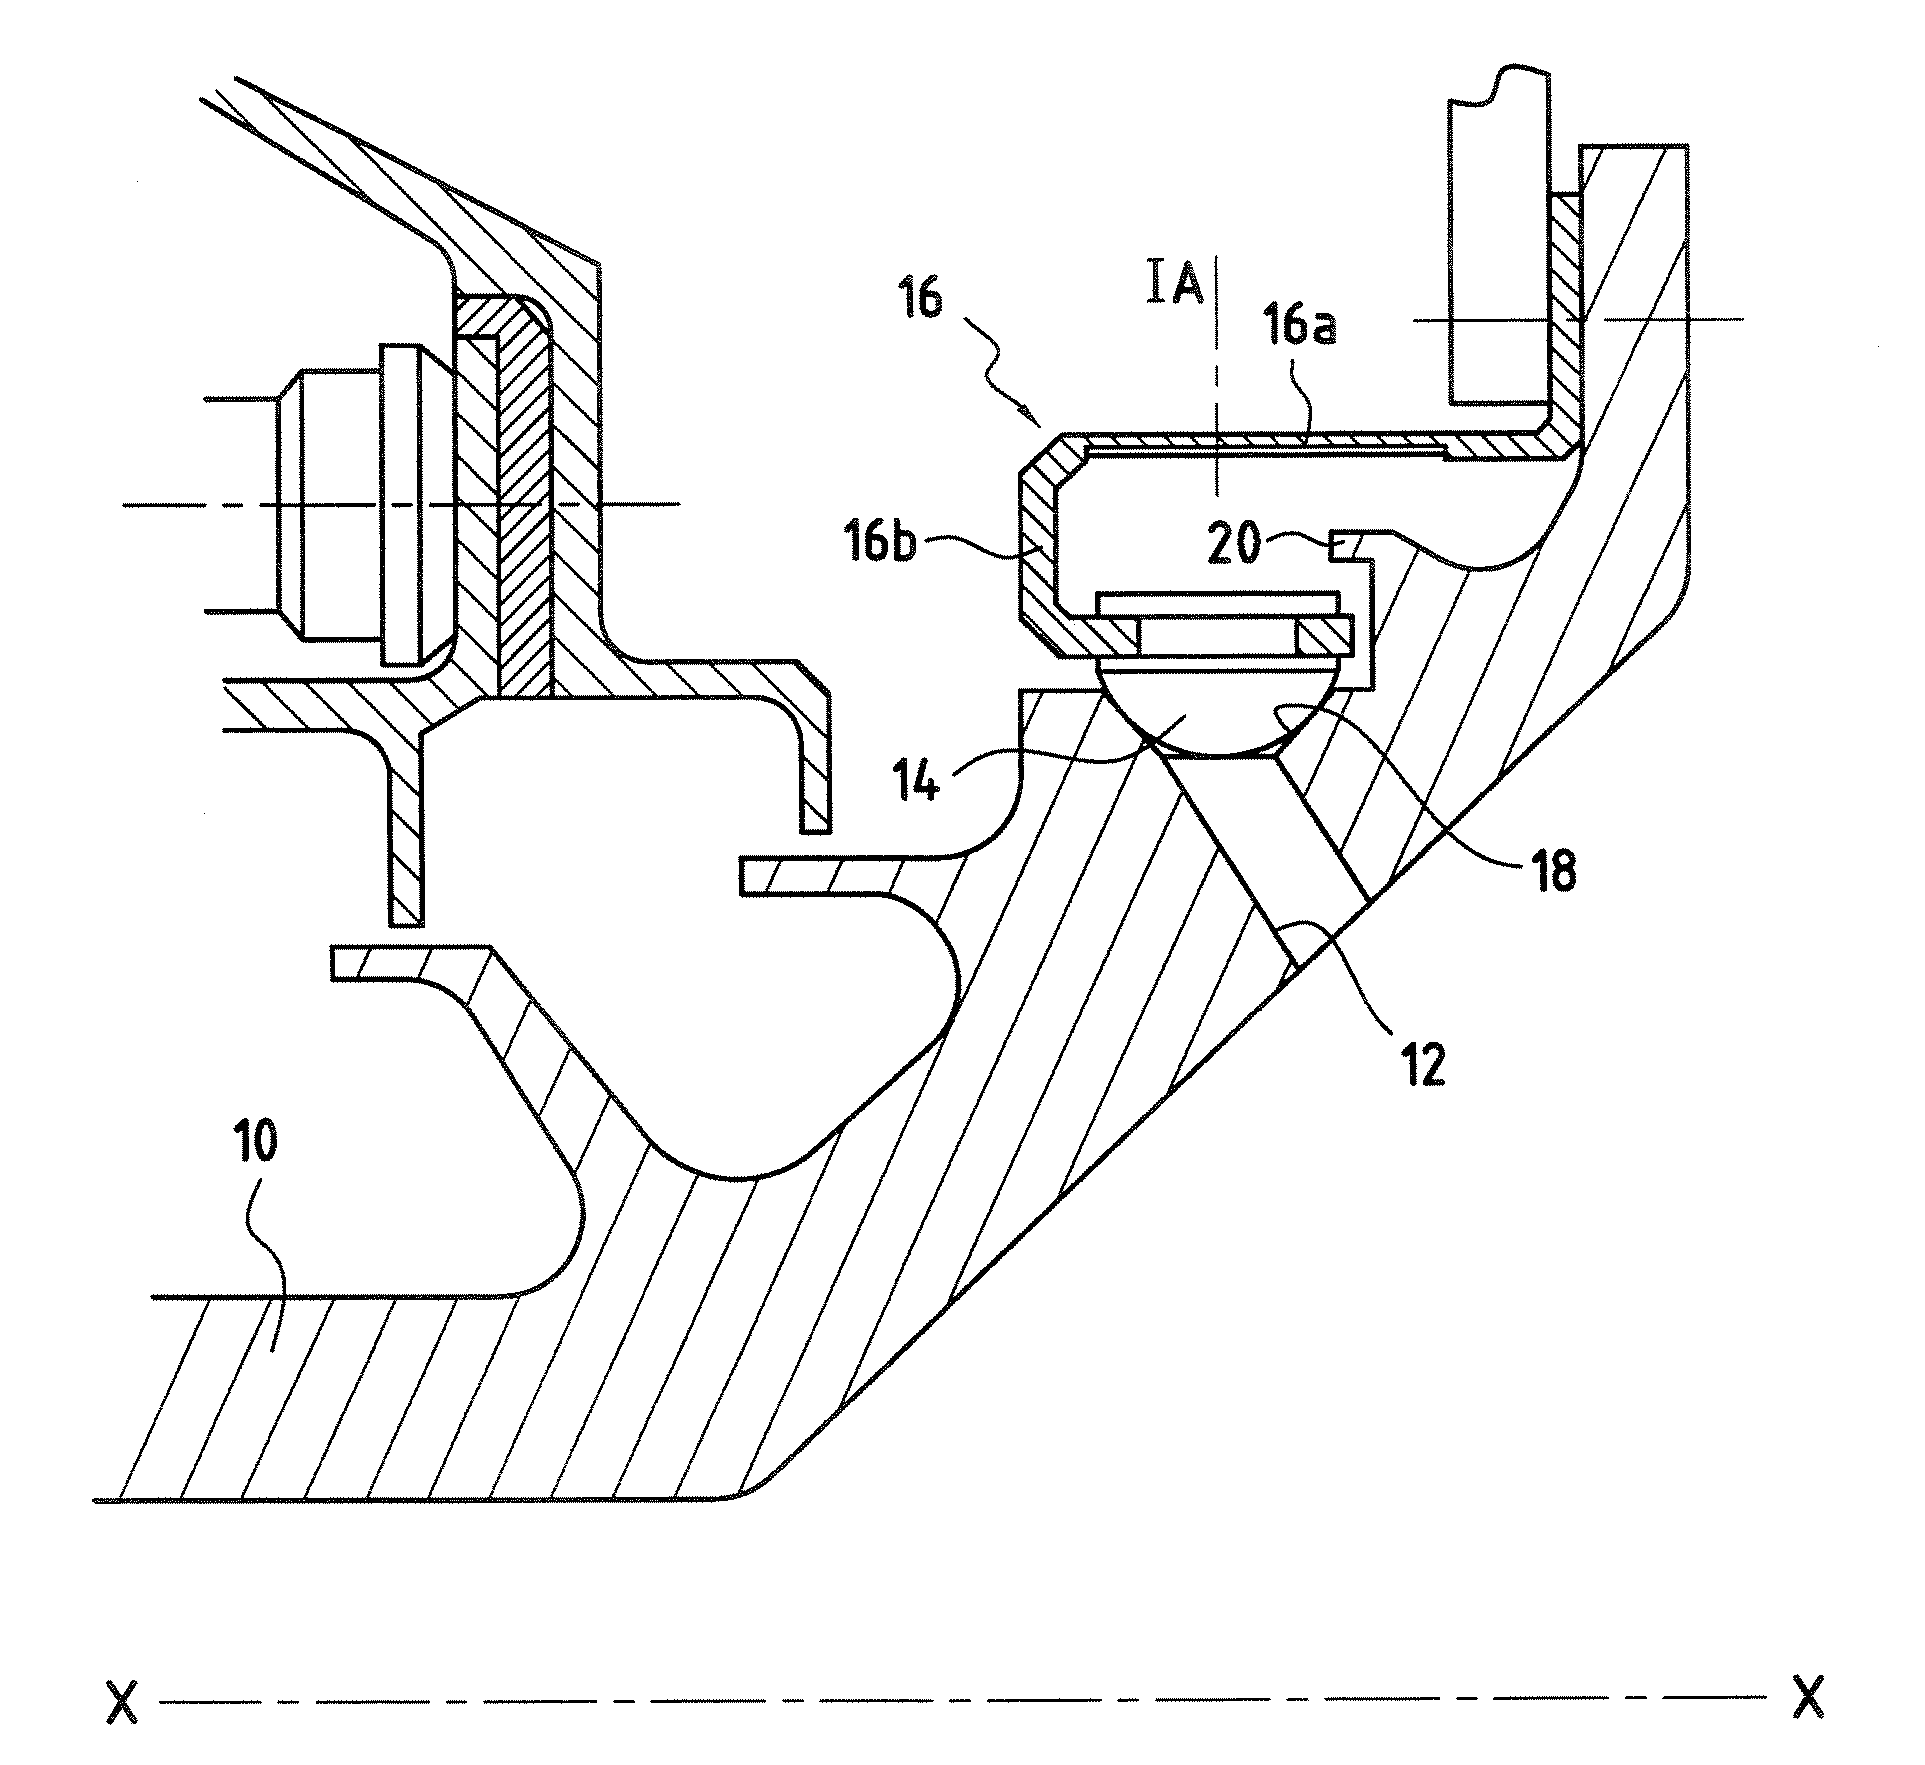 A method of regulating the flow rate of air in a rotary shaft of a turbomachine